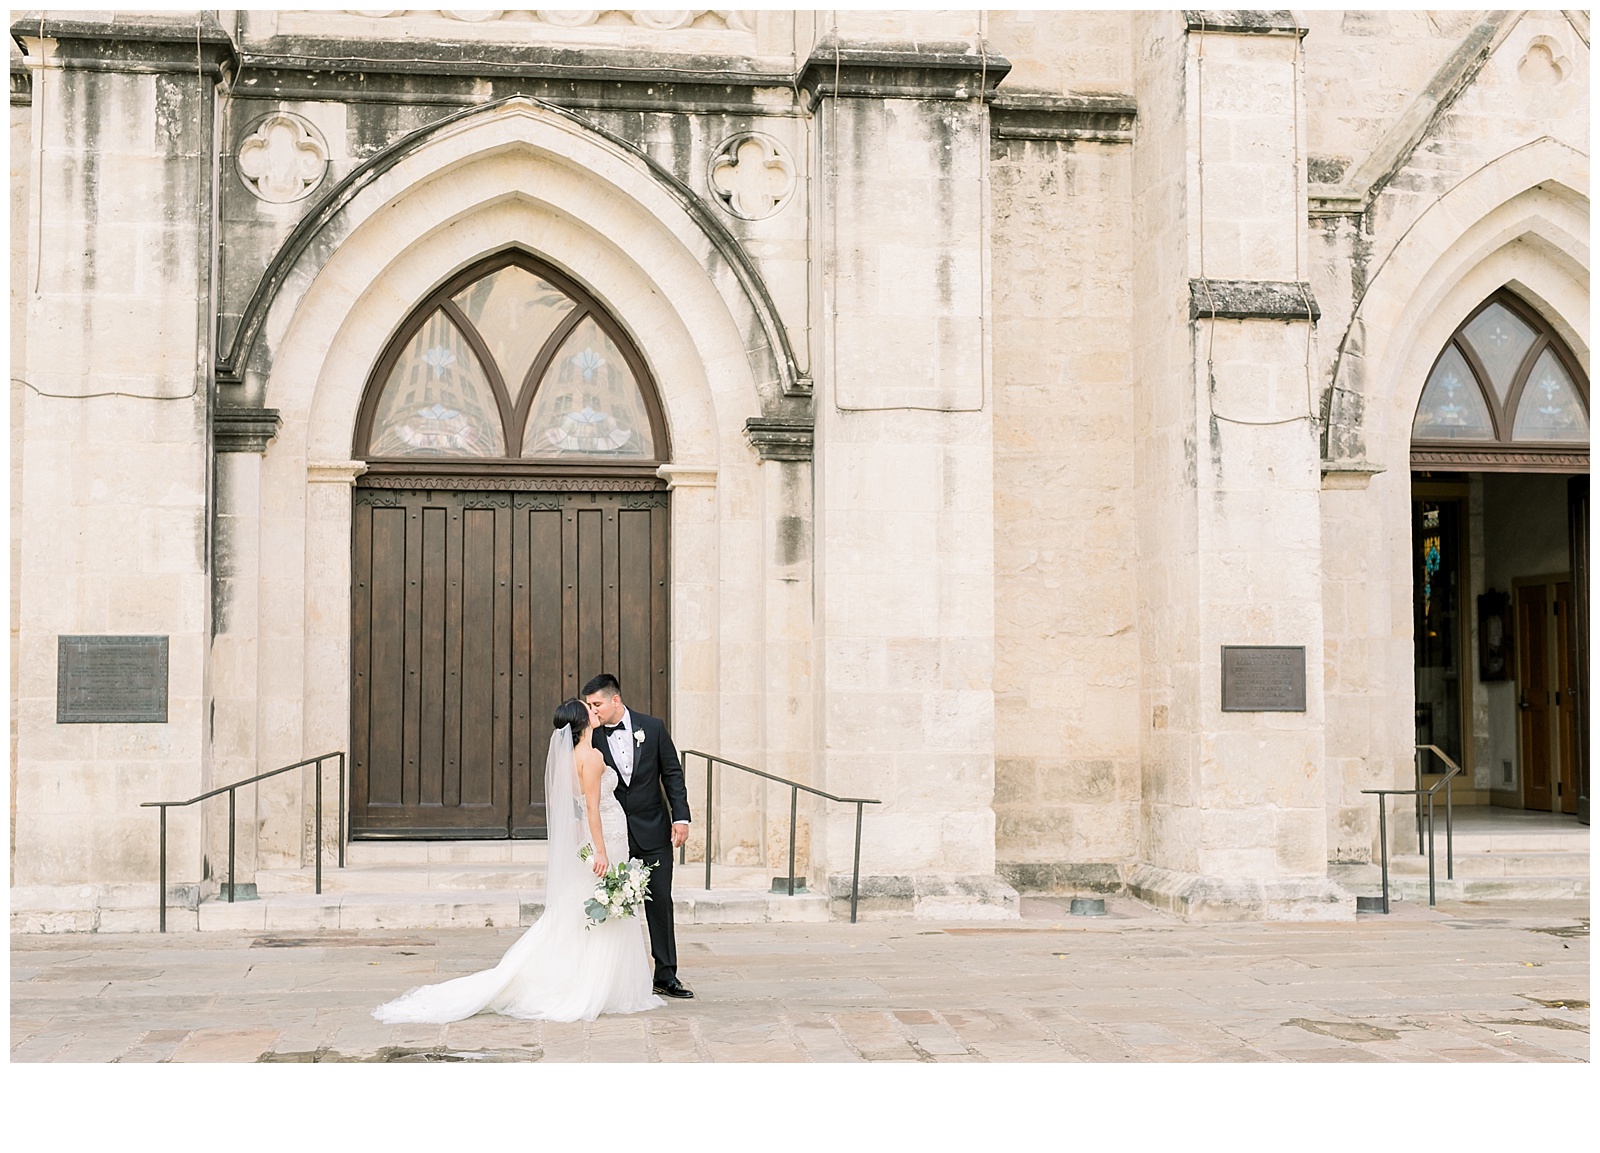 Just married kiss for A San Fernando Cathedral Wedding in San Antonio, TX | Monica Roberts Photography | www.monicaroberts.com | San Antonio Wedding Photographer